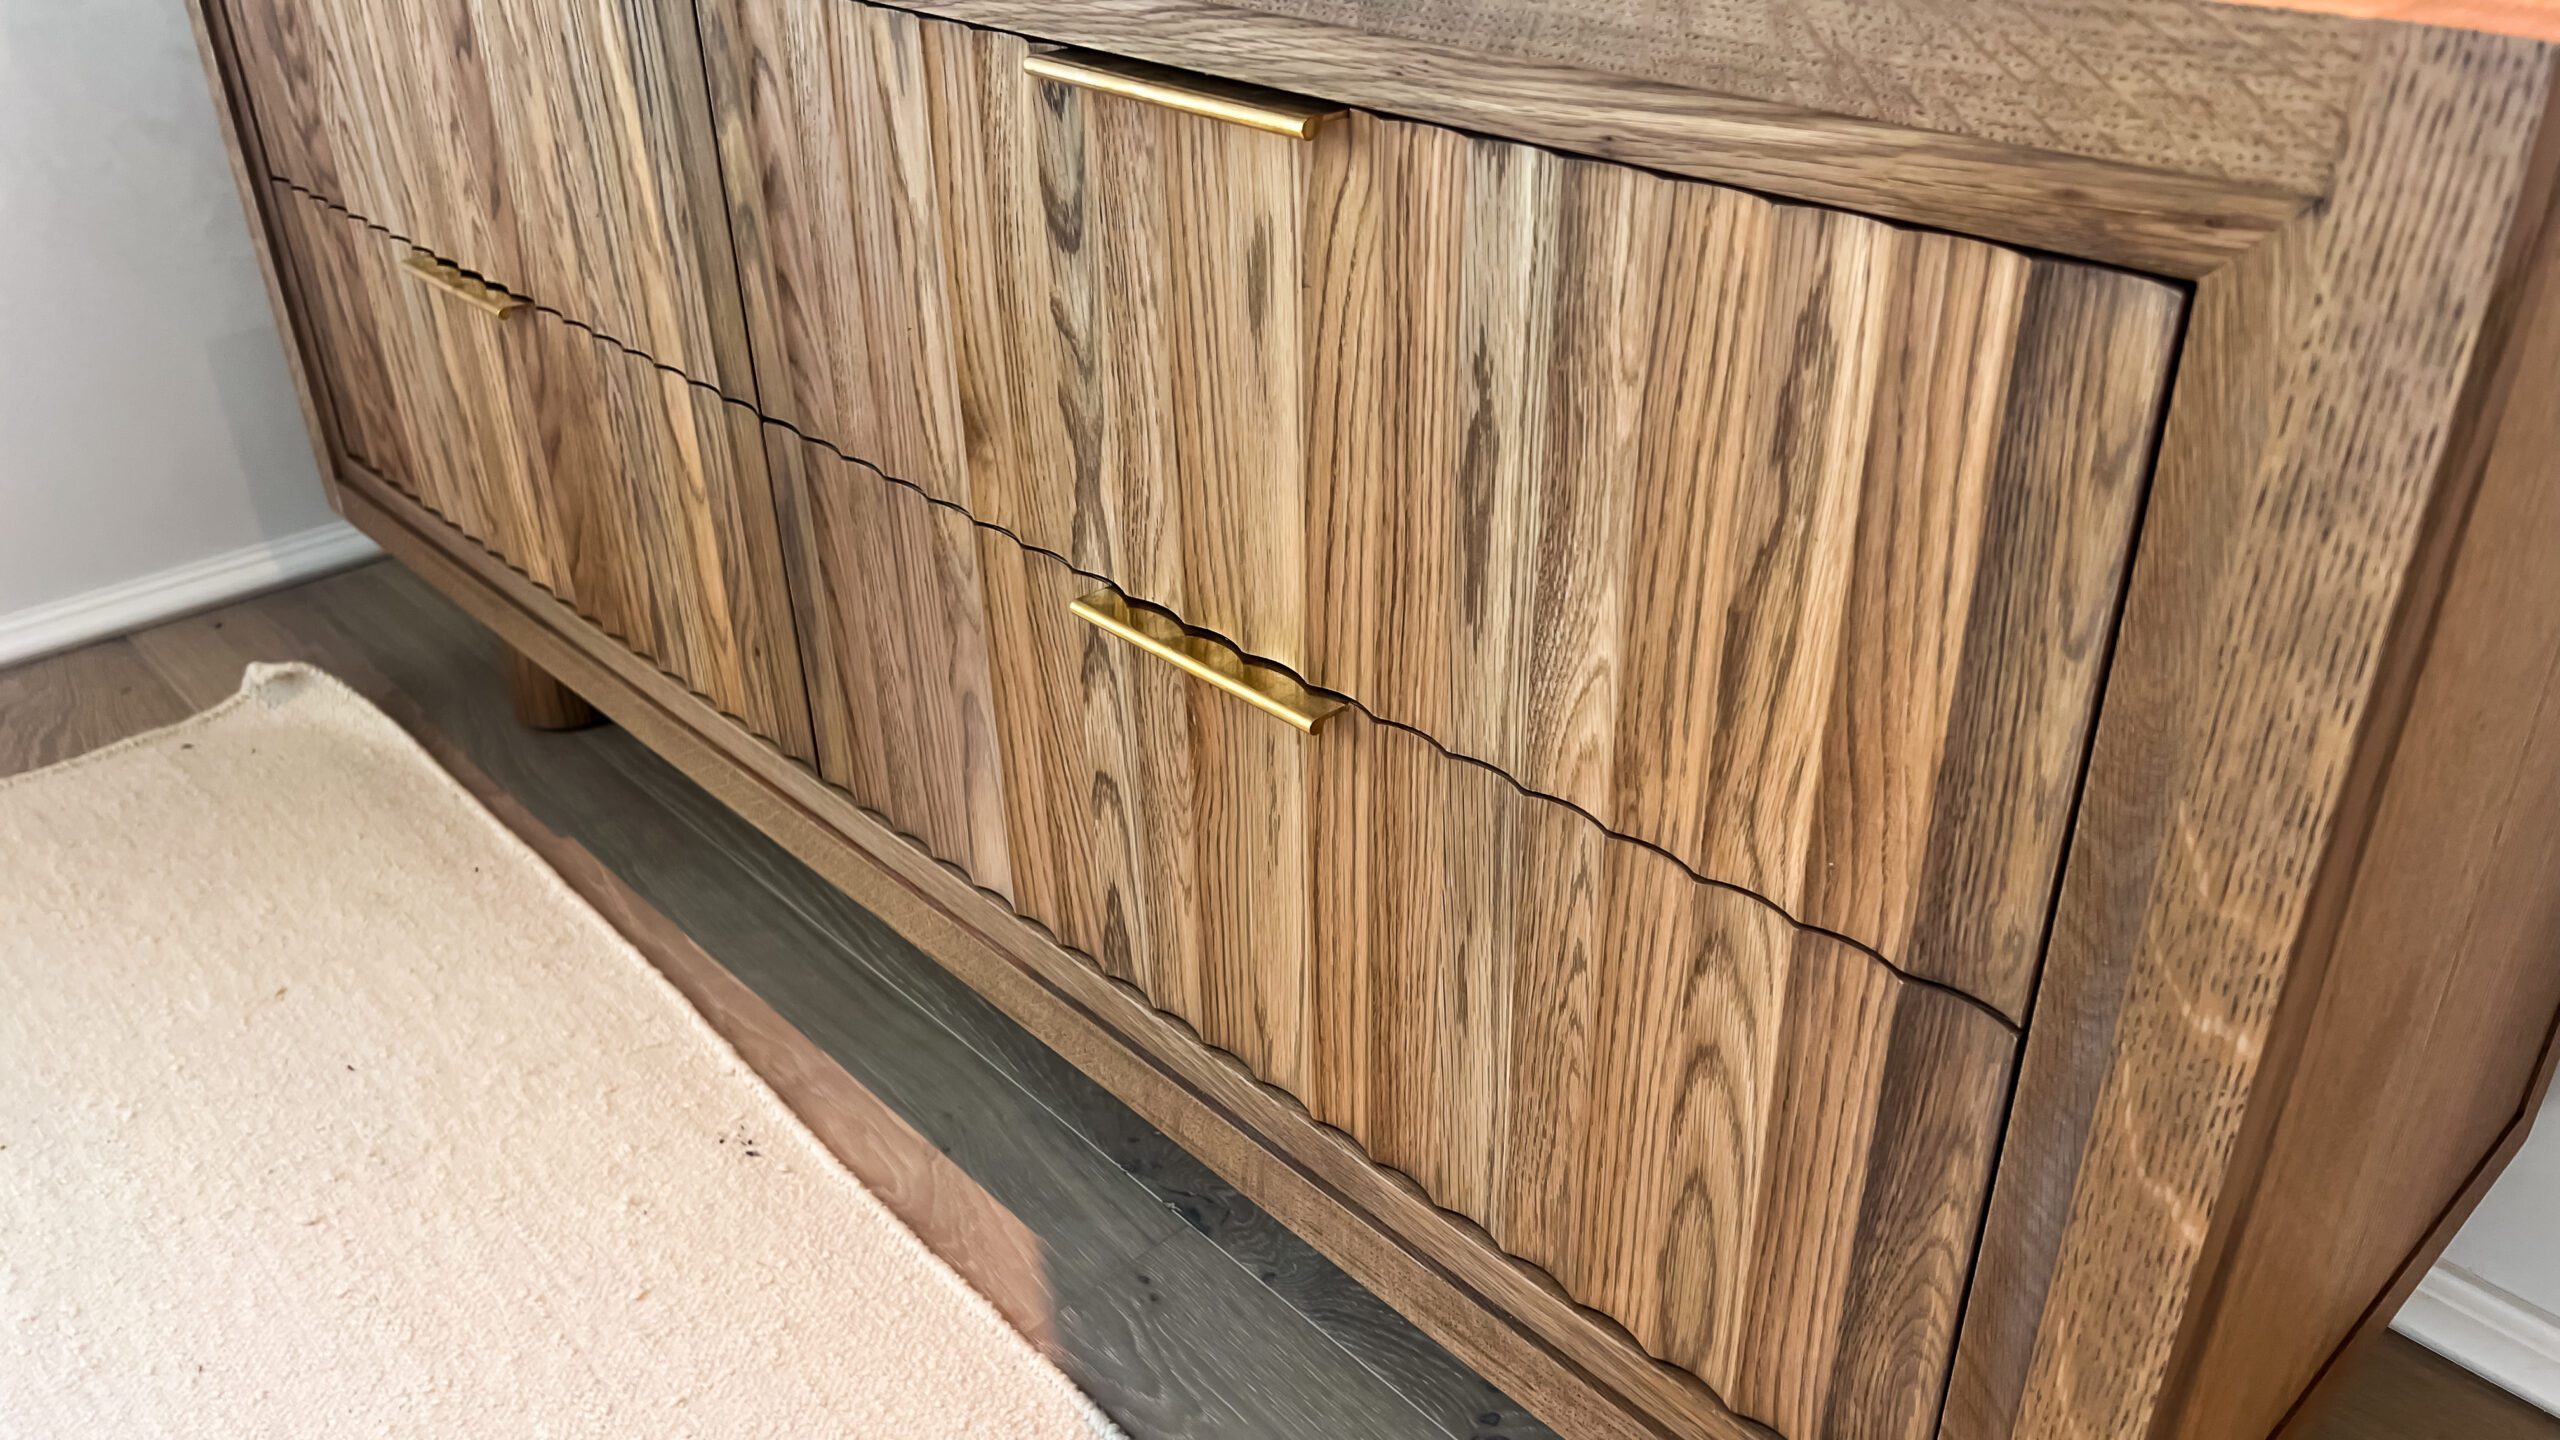 Fluted credenza with white oak up close